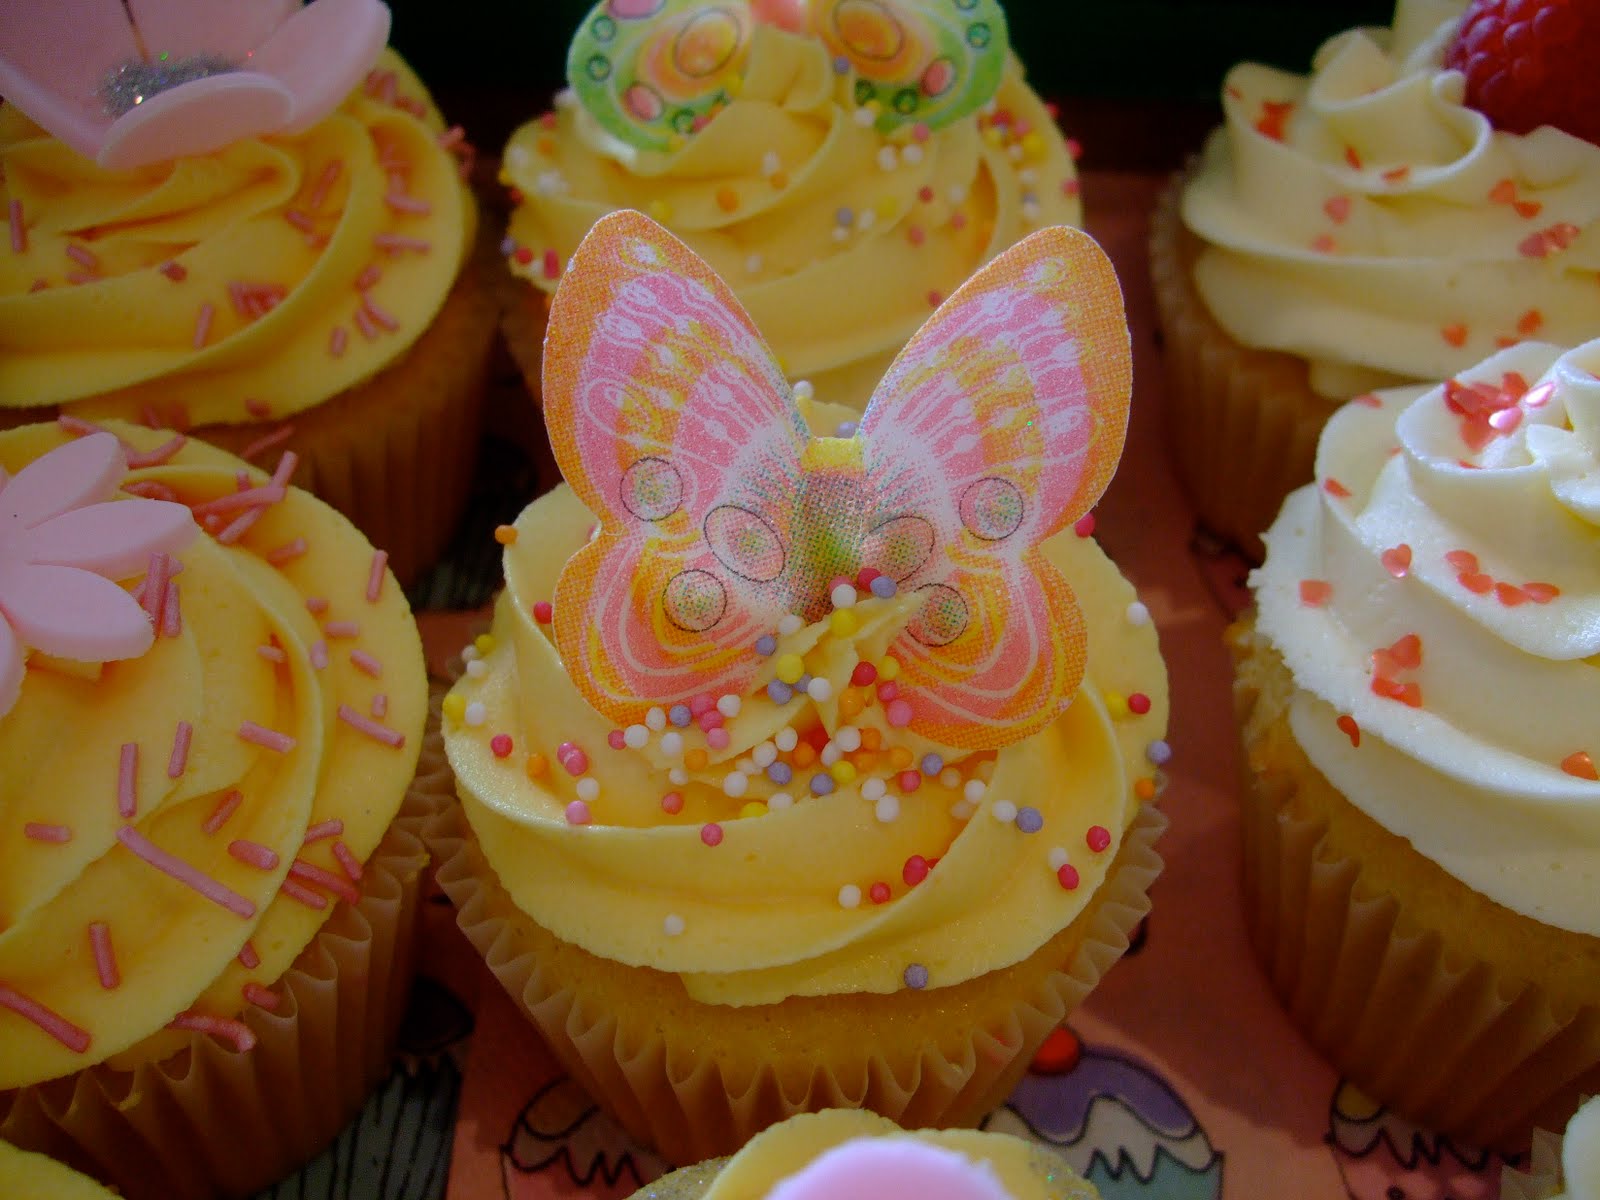 Colourful Cupcakes of Newbury: Summer Lunch Cupcakes